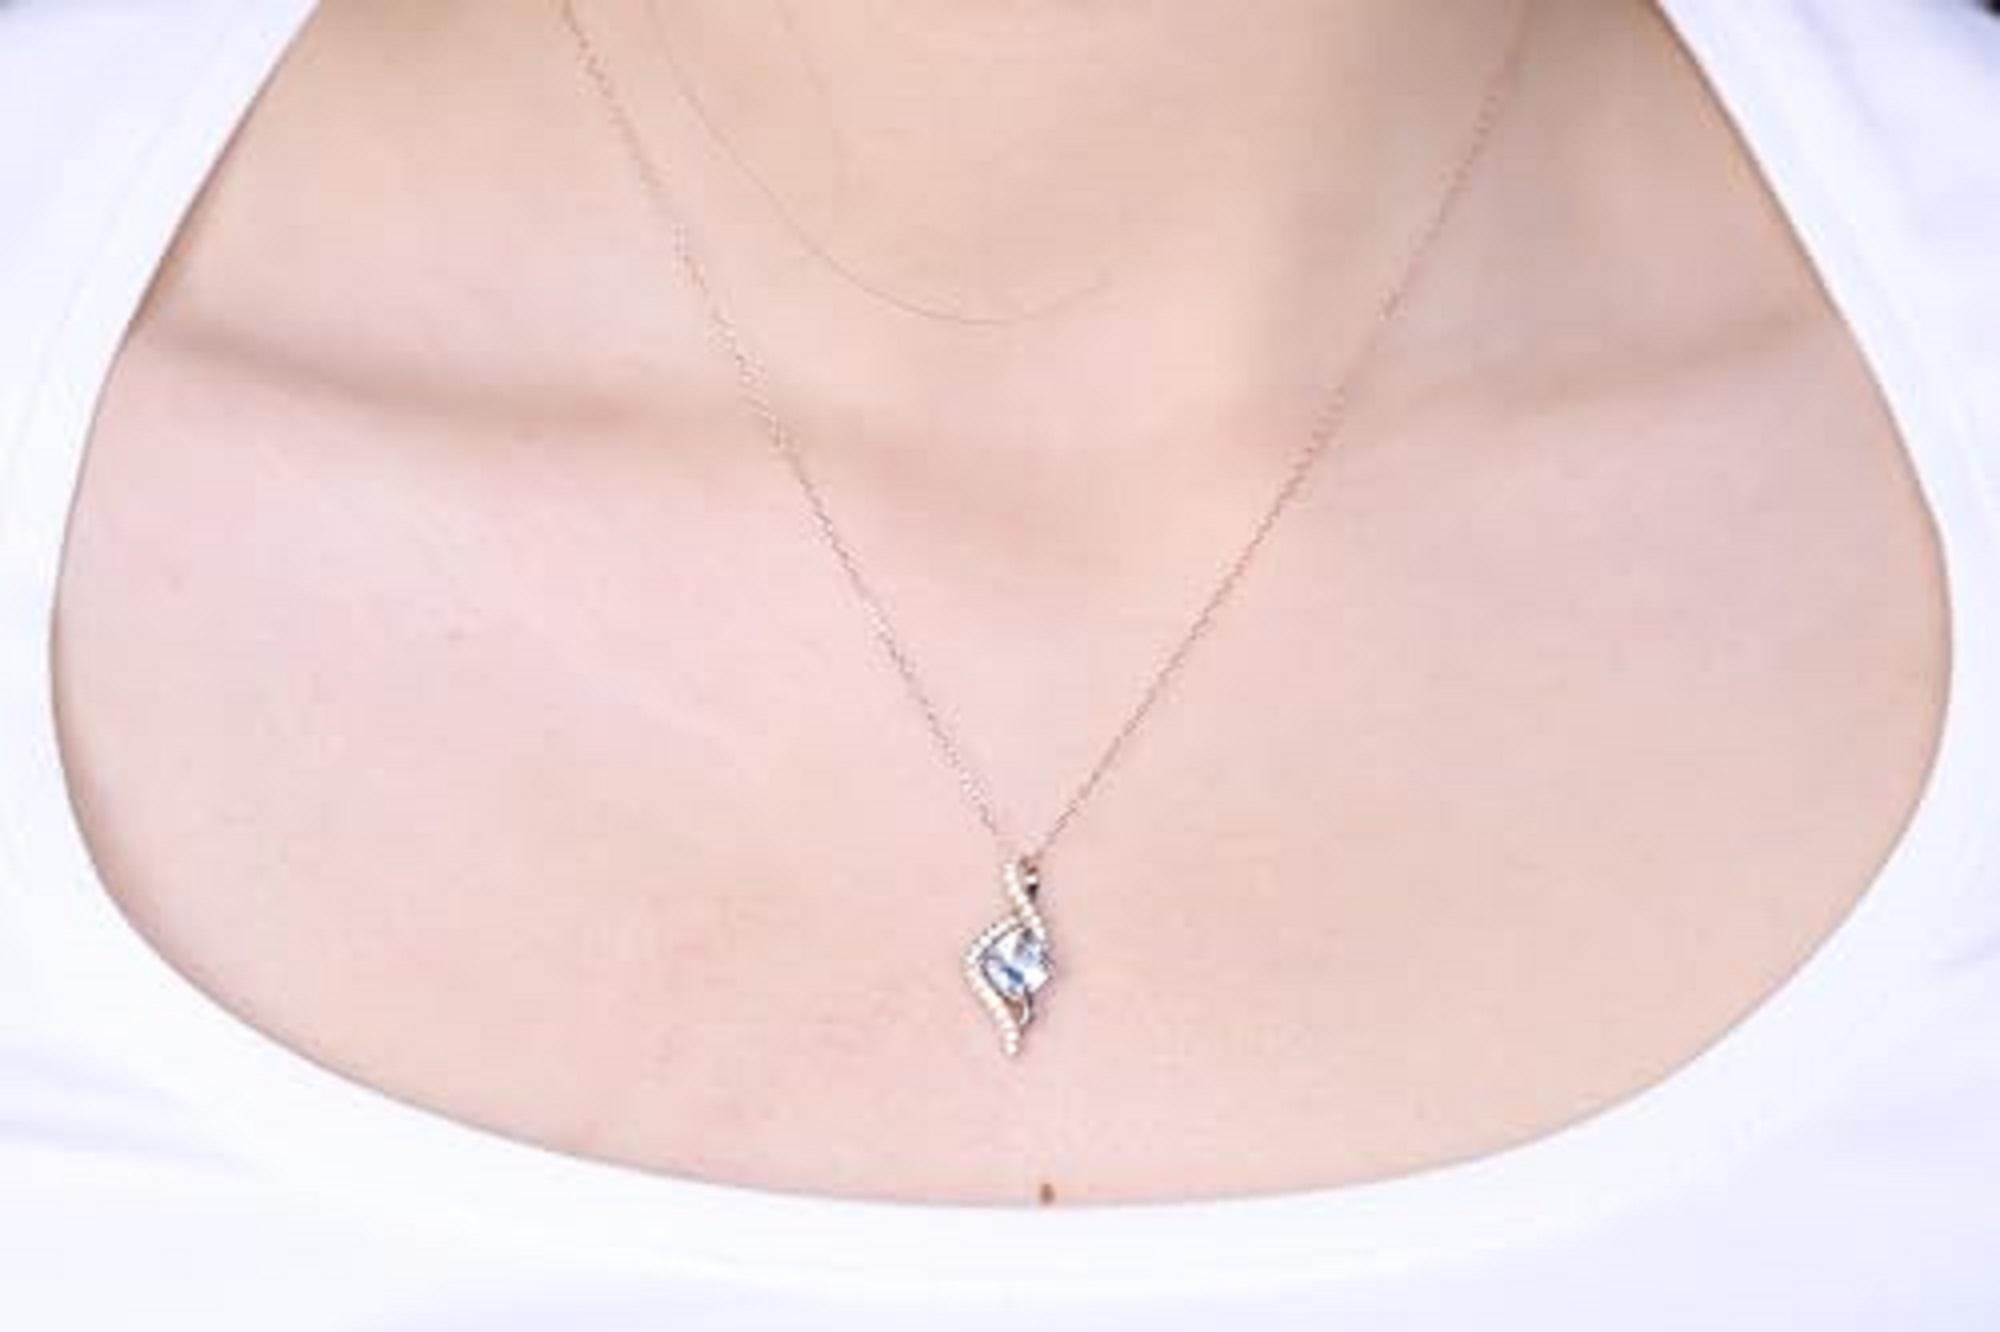 Decorate yourself in elegance with this Pendant is crafted from 14-karat Rose Gold by Gin & Grace Pendant. This Pendant is made up of 6.0mm Cushion-cut Prong setting Aquamarine (1 Pcs) 0.86 Carat and Round-Cut Prong setting White Diamond (25 Pcs)